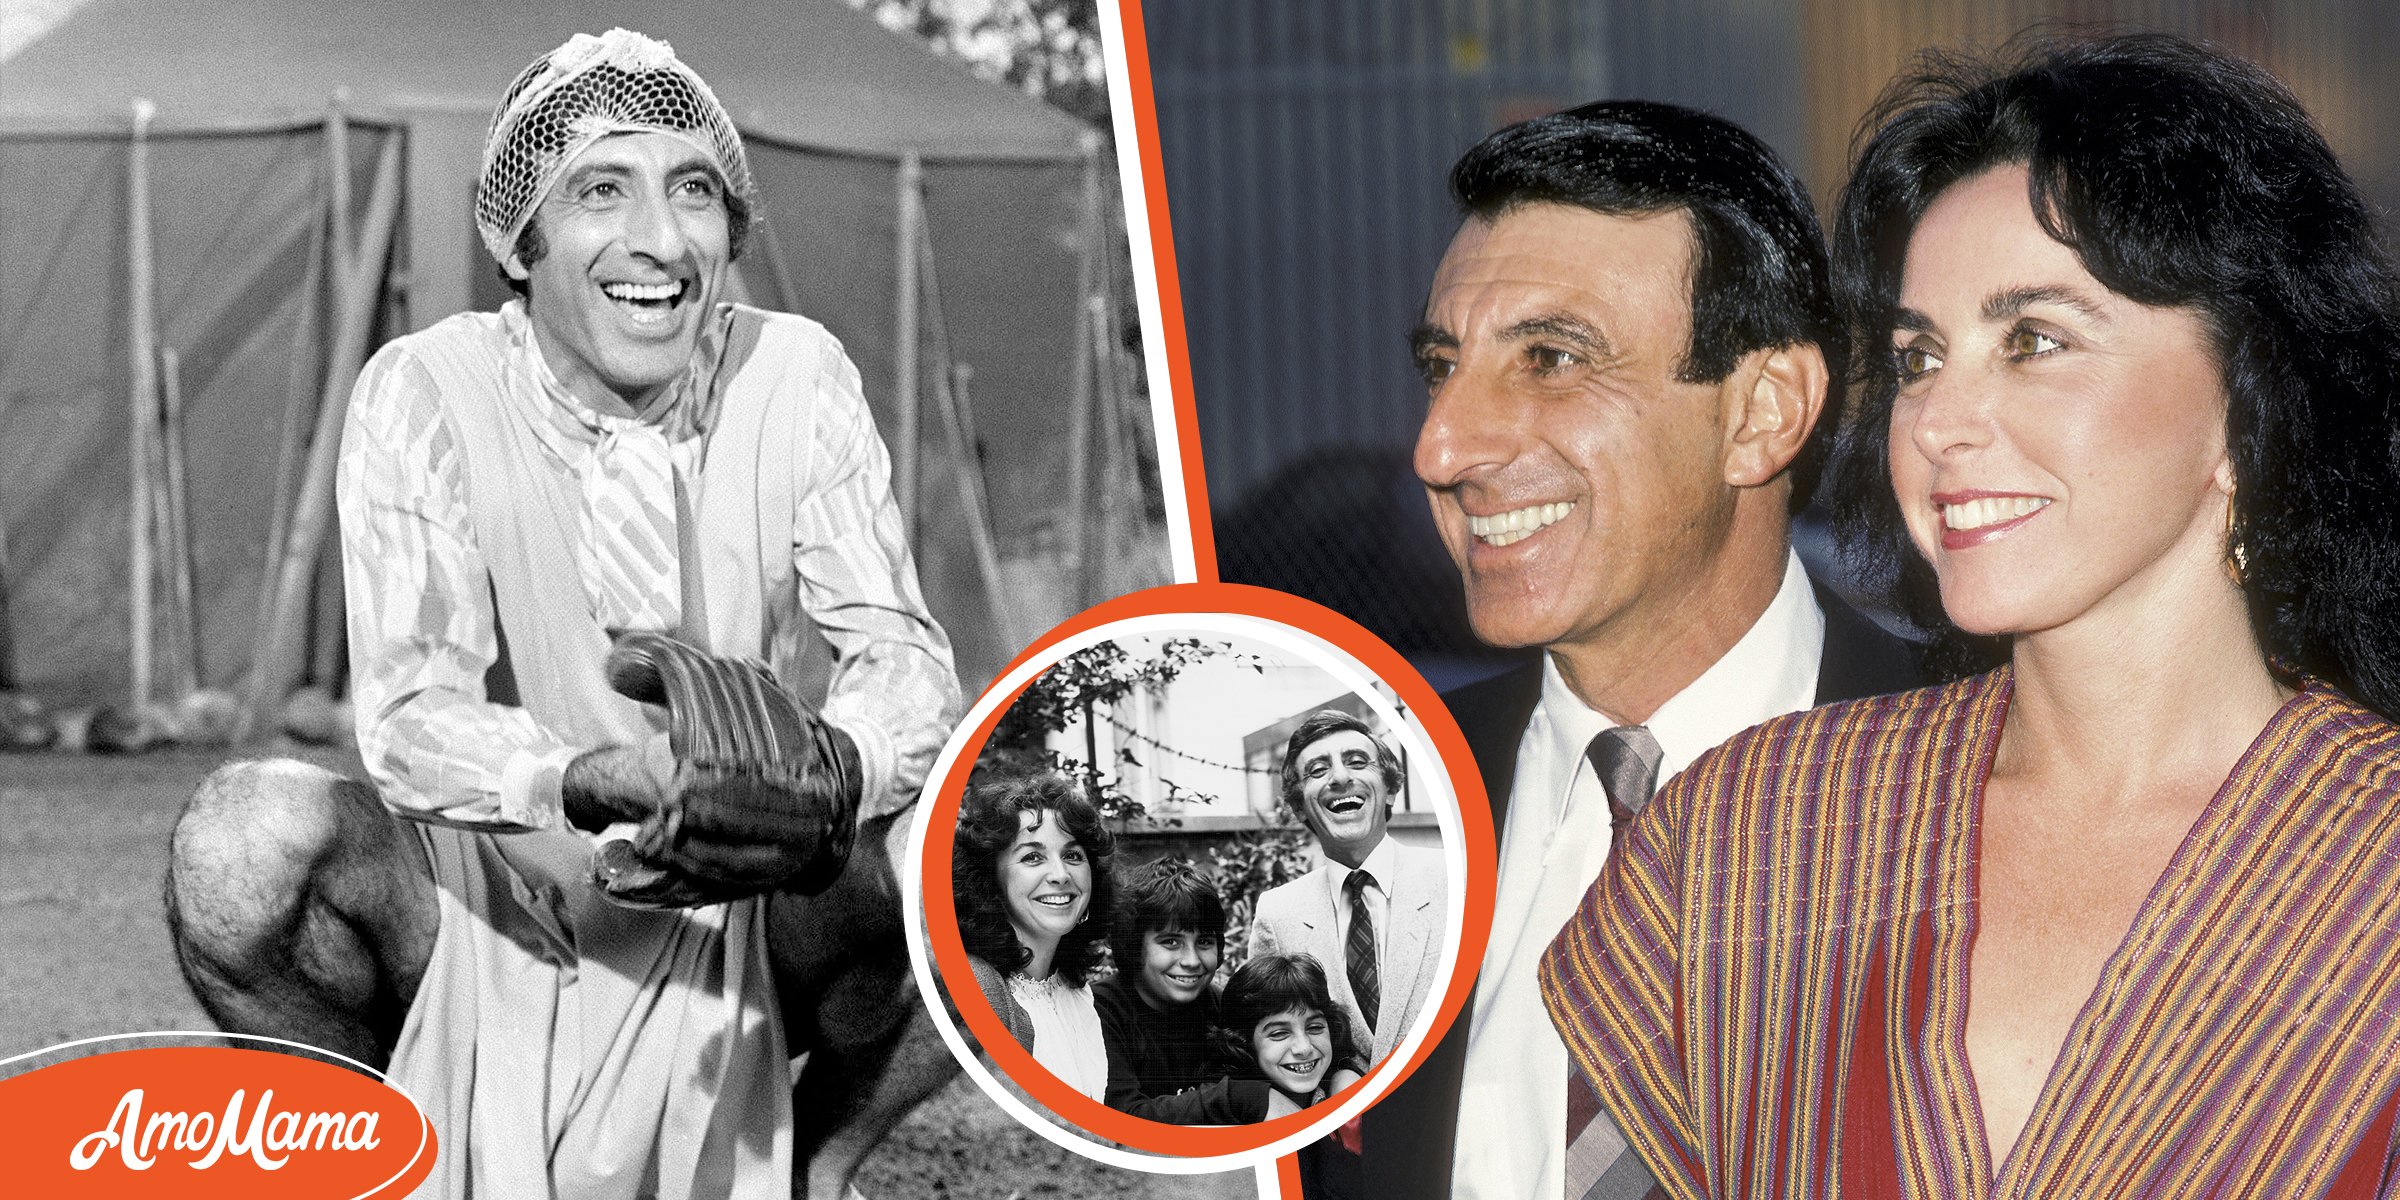 'M*A*S*H's Jamie Farr Didn't Have Money for Ring When He Proposed